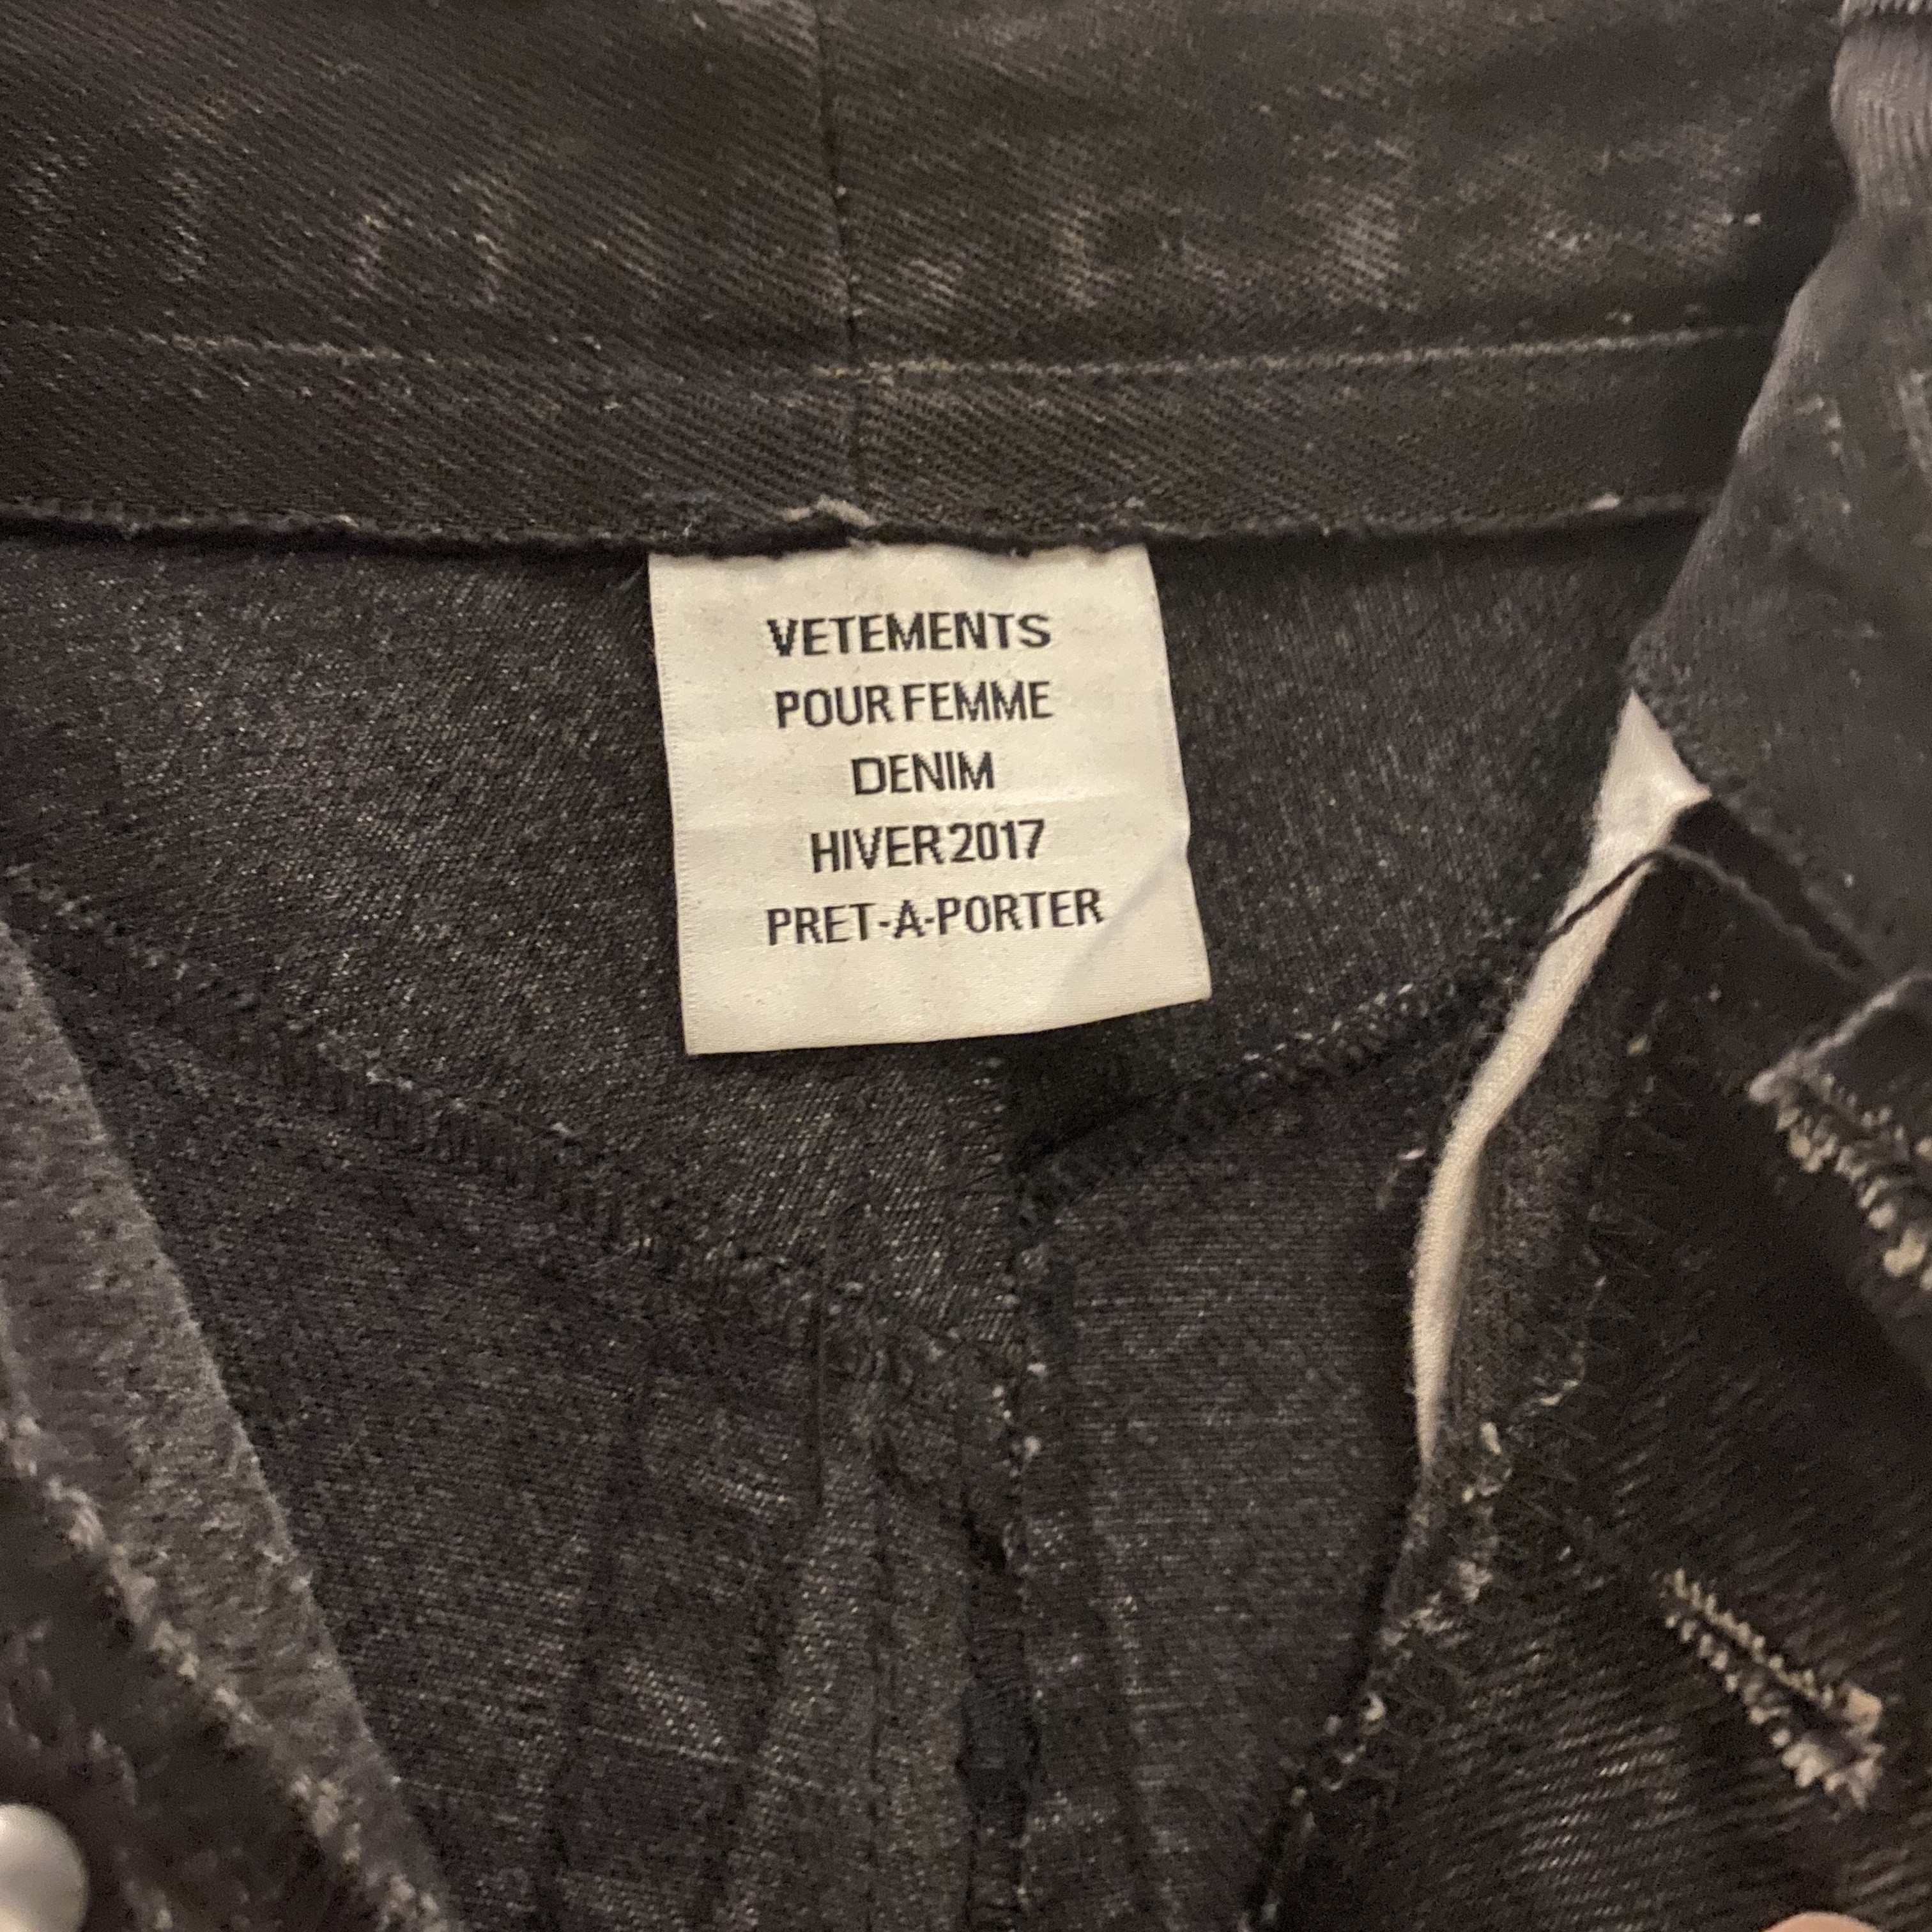 Vetements reworked jeans - 7